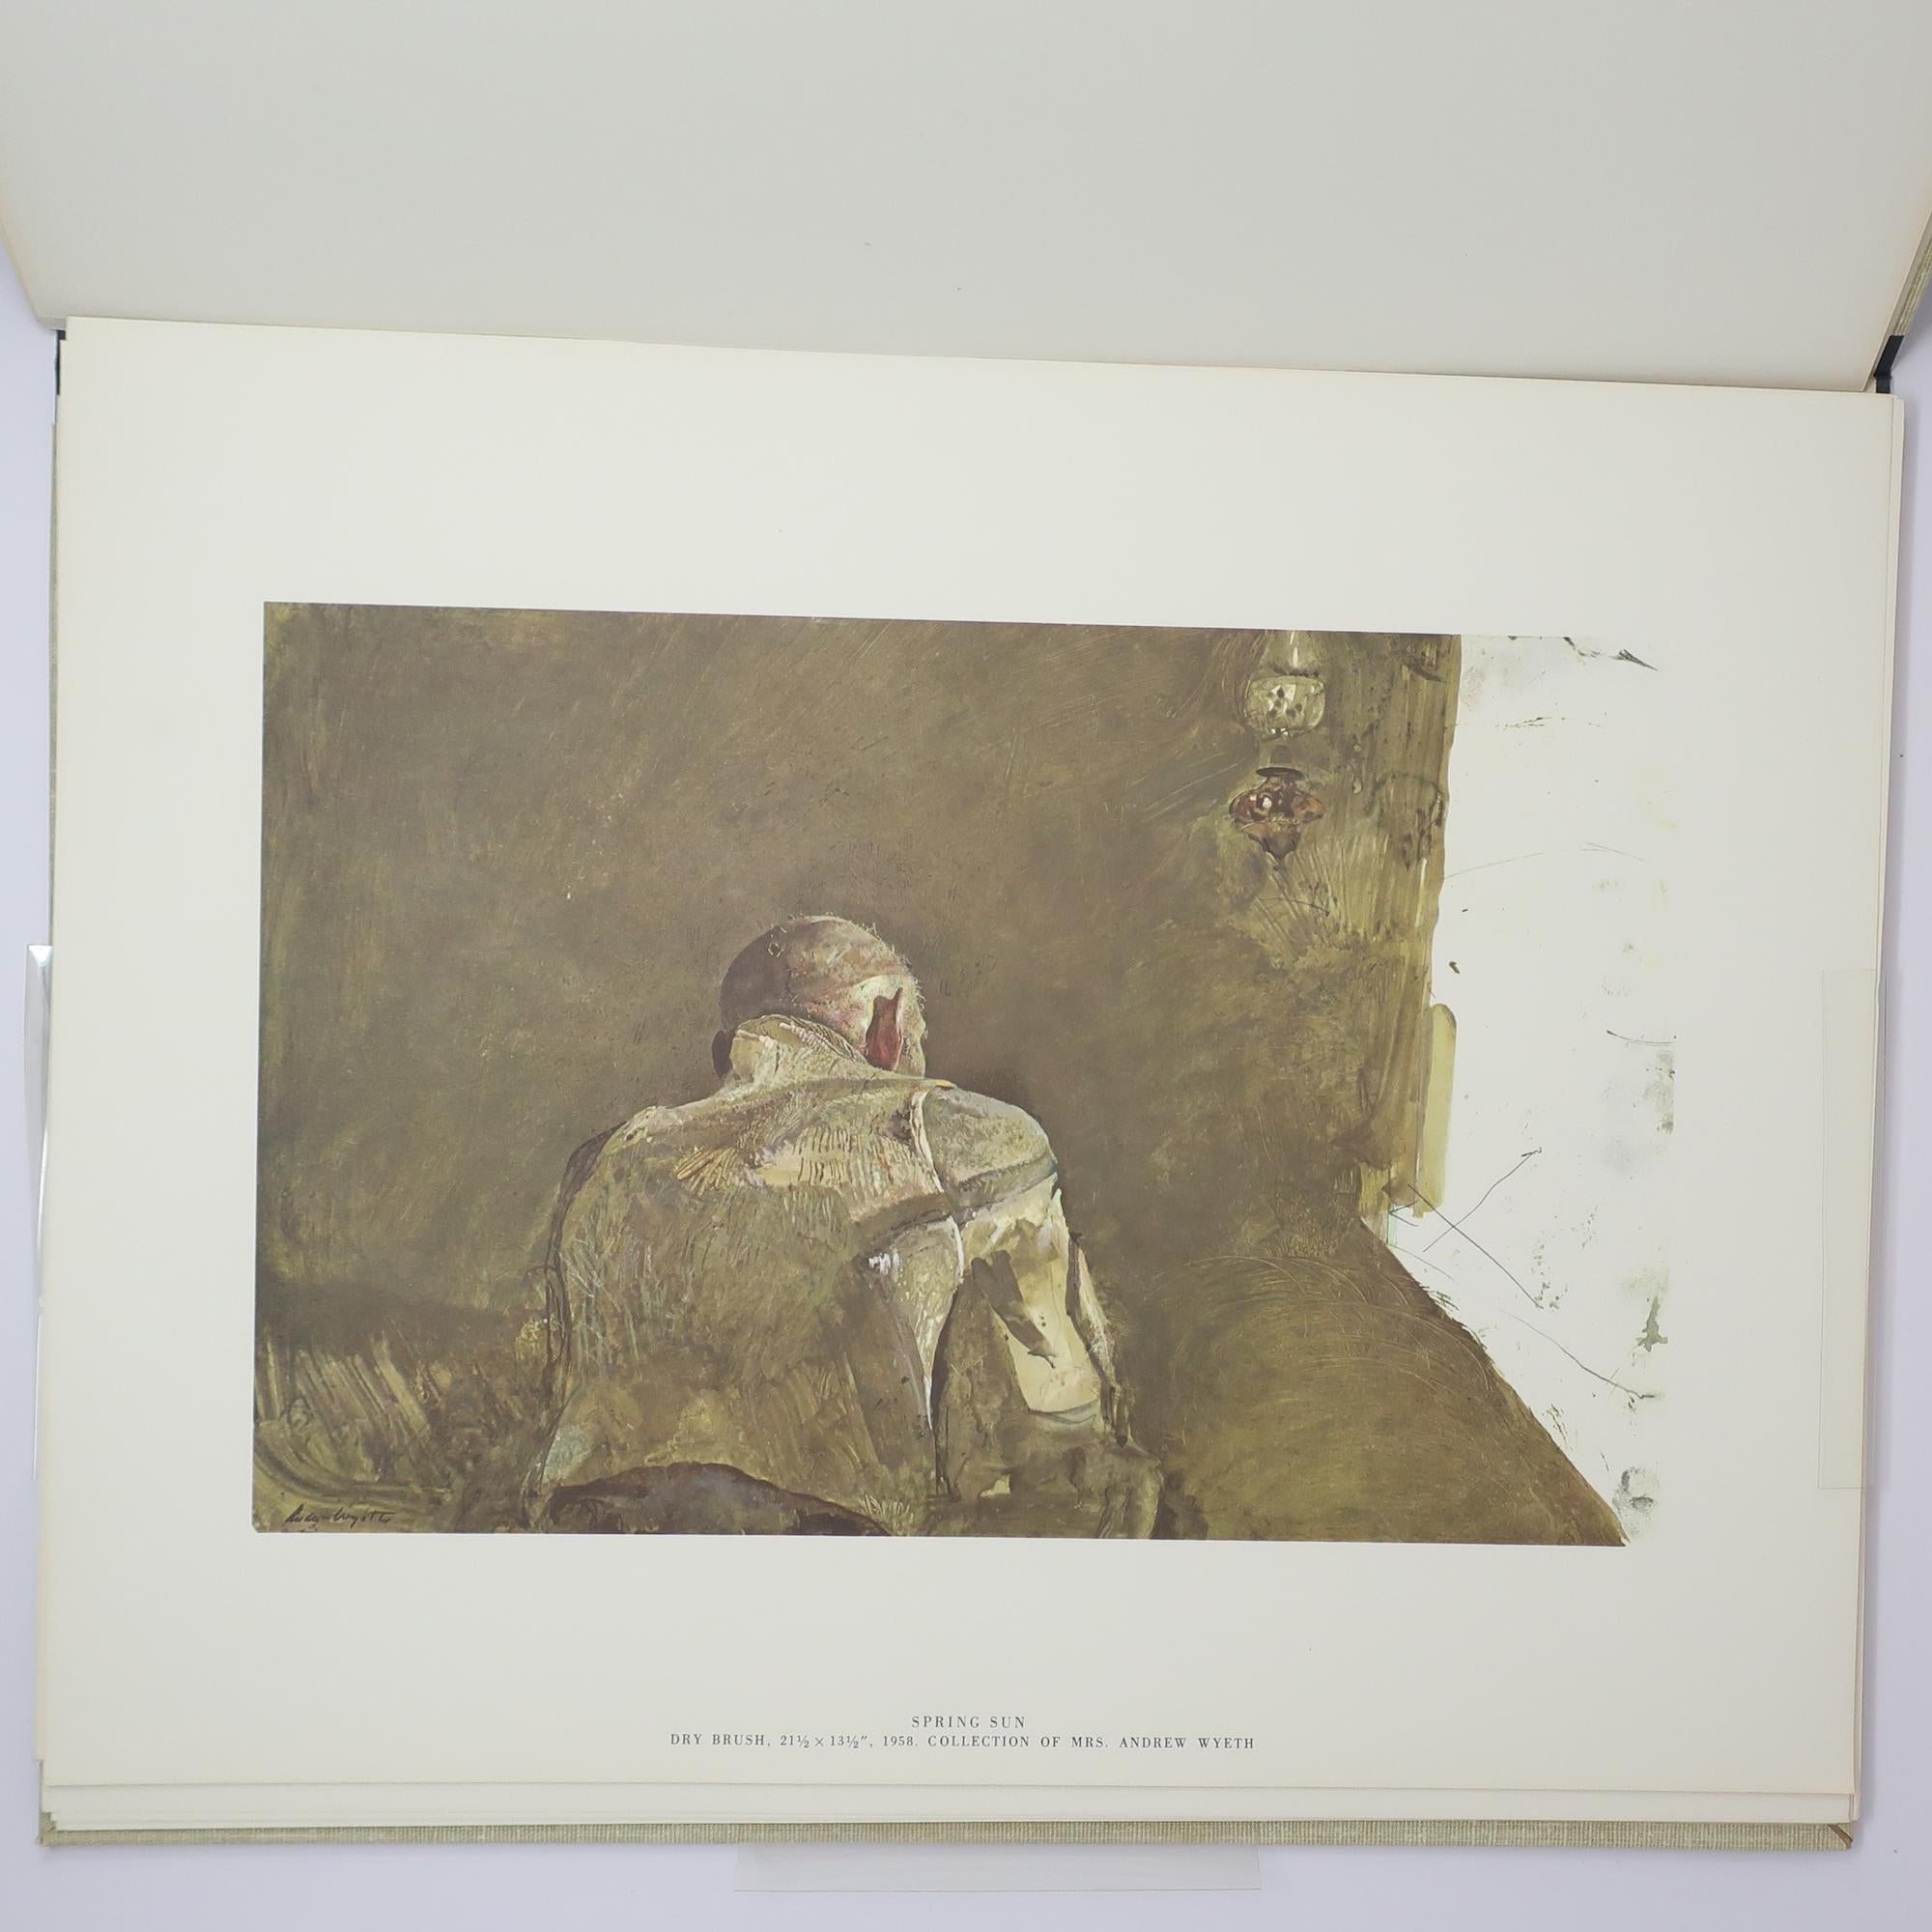 Four Seasons: Fine Prints from Paintings and Drawings by Andrew Wyeth Folio 2